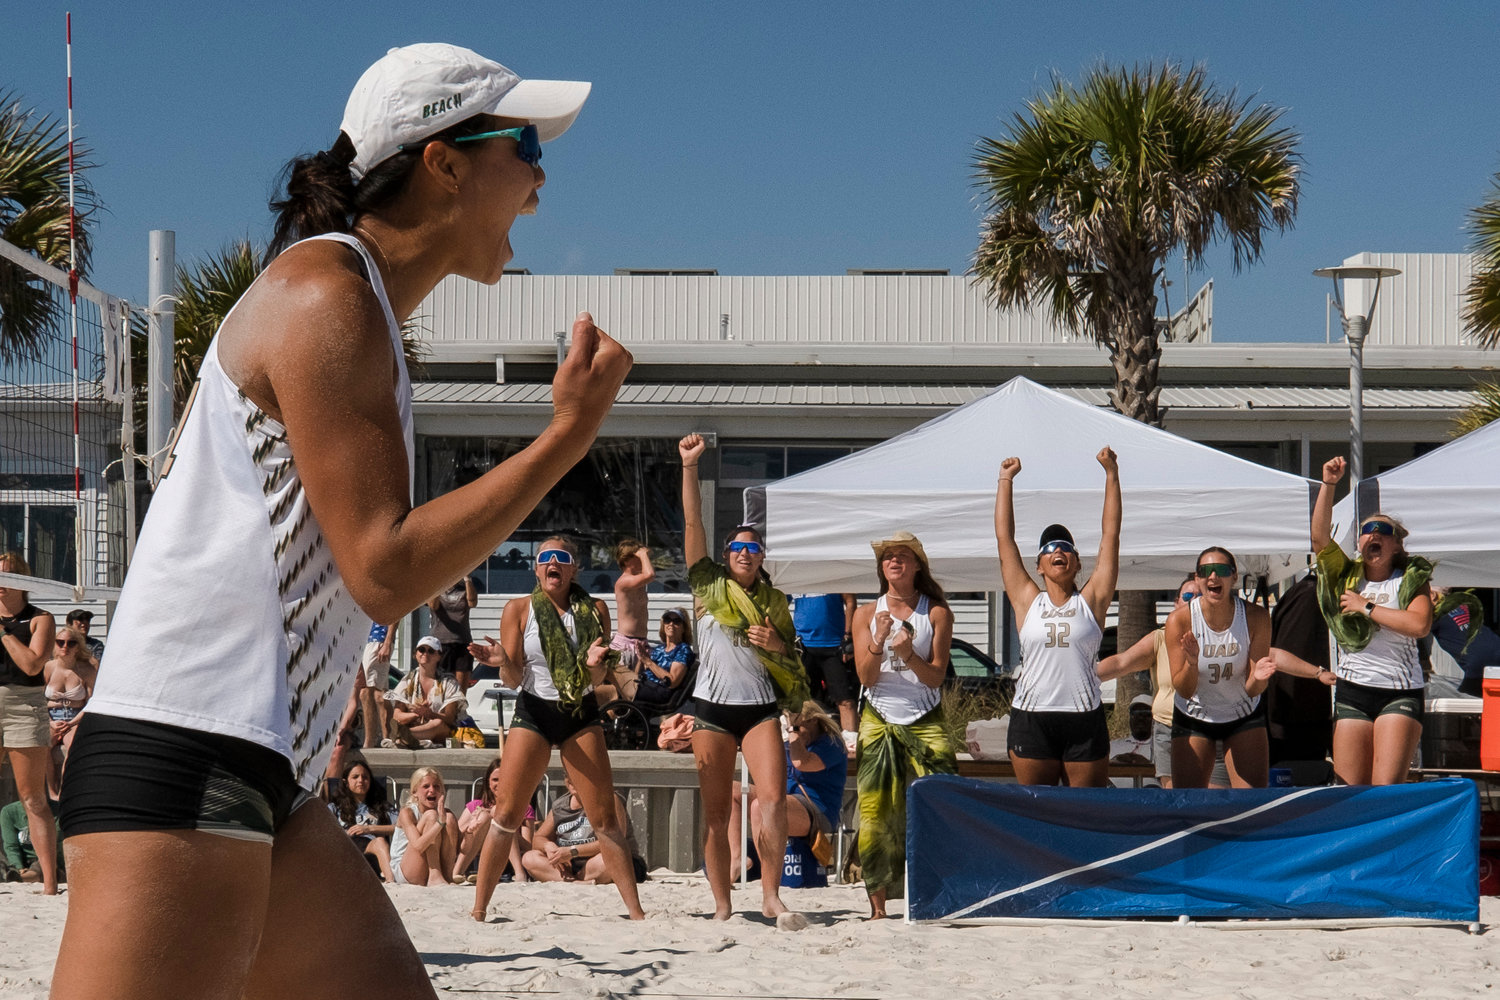 The UAB Blazers celebrate a point during the March to May tournament March 20, 2022, at the Gulf Place Beach in Gulf Shores. This weekend, they’ll play host to the fifth annual spring break tournament featuring half of the top-10 teams in the nation.